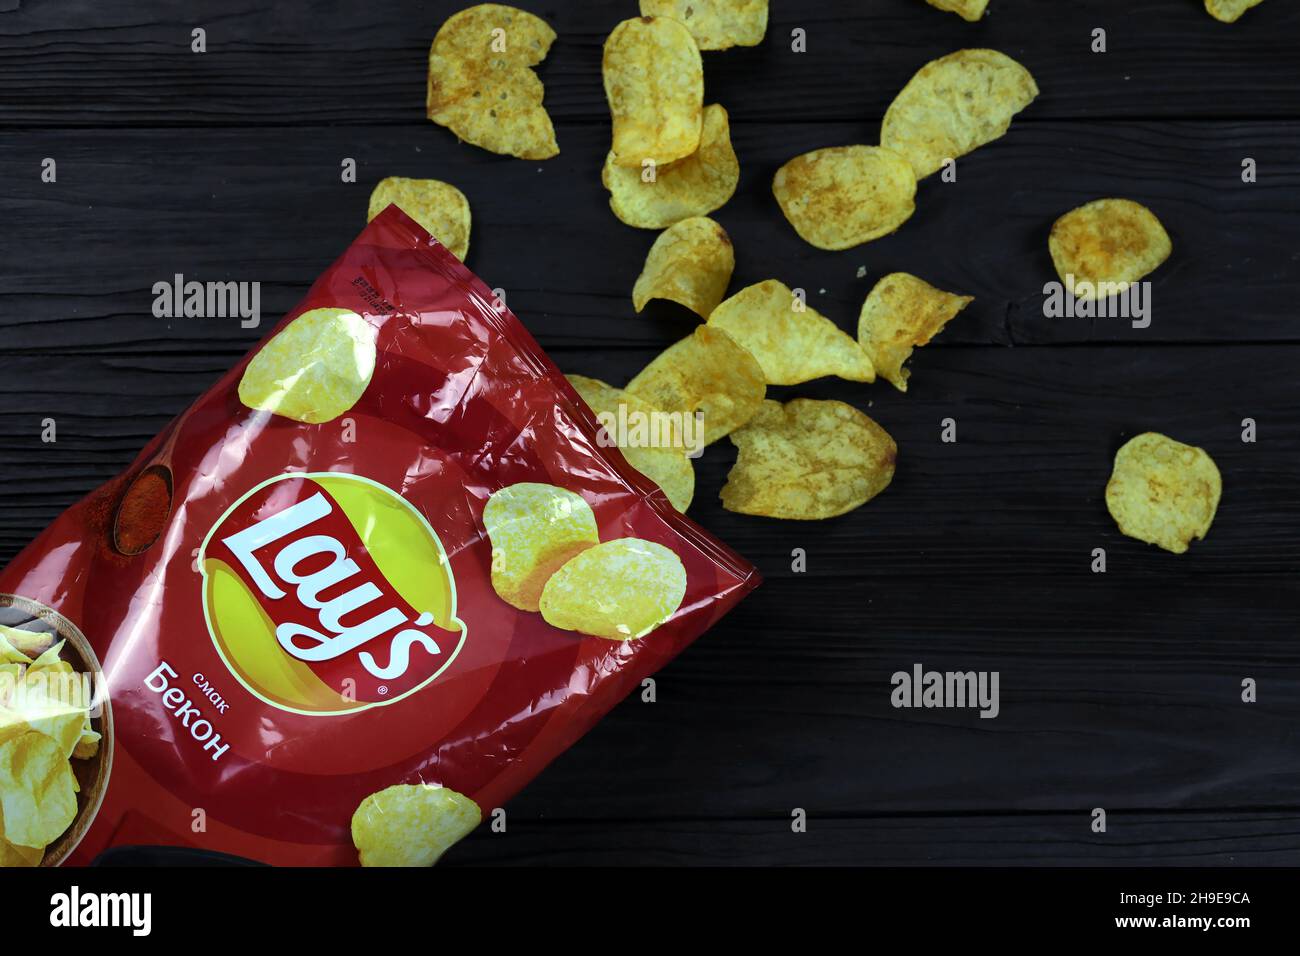 KHARKOV, UKRAINE - JANUARY 3, 2021: Lays potato chips with bacon flavour and original lays logo in middle of package. Worldwide famous brand of potato Stock Photo